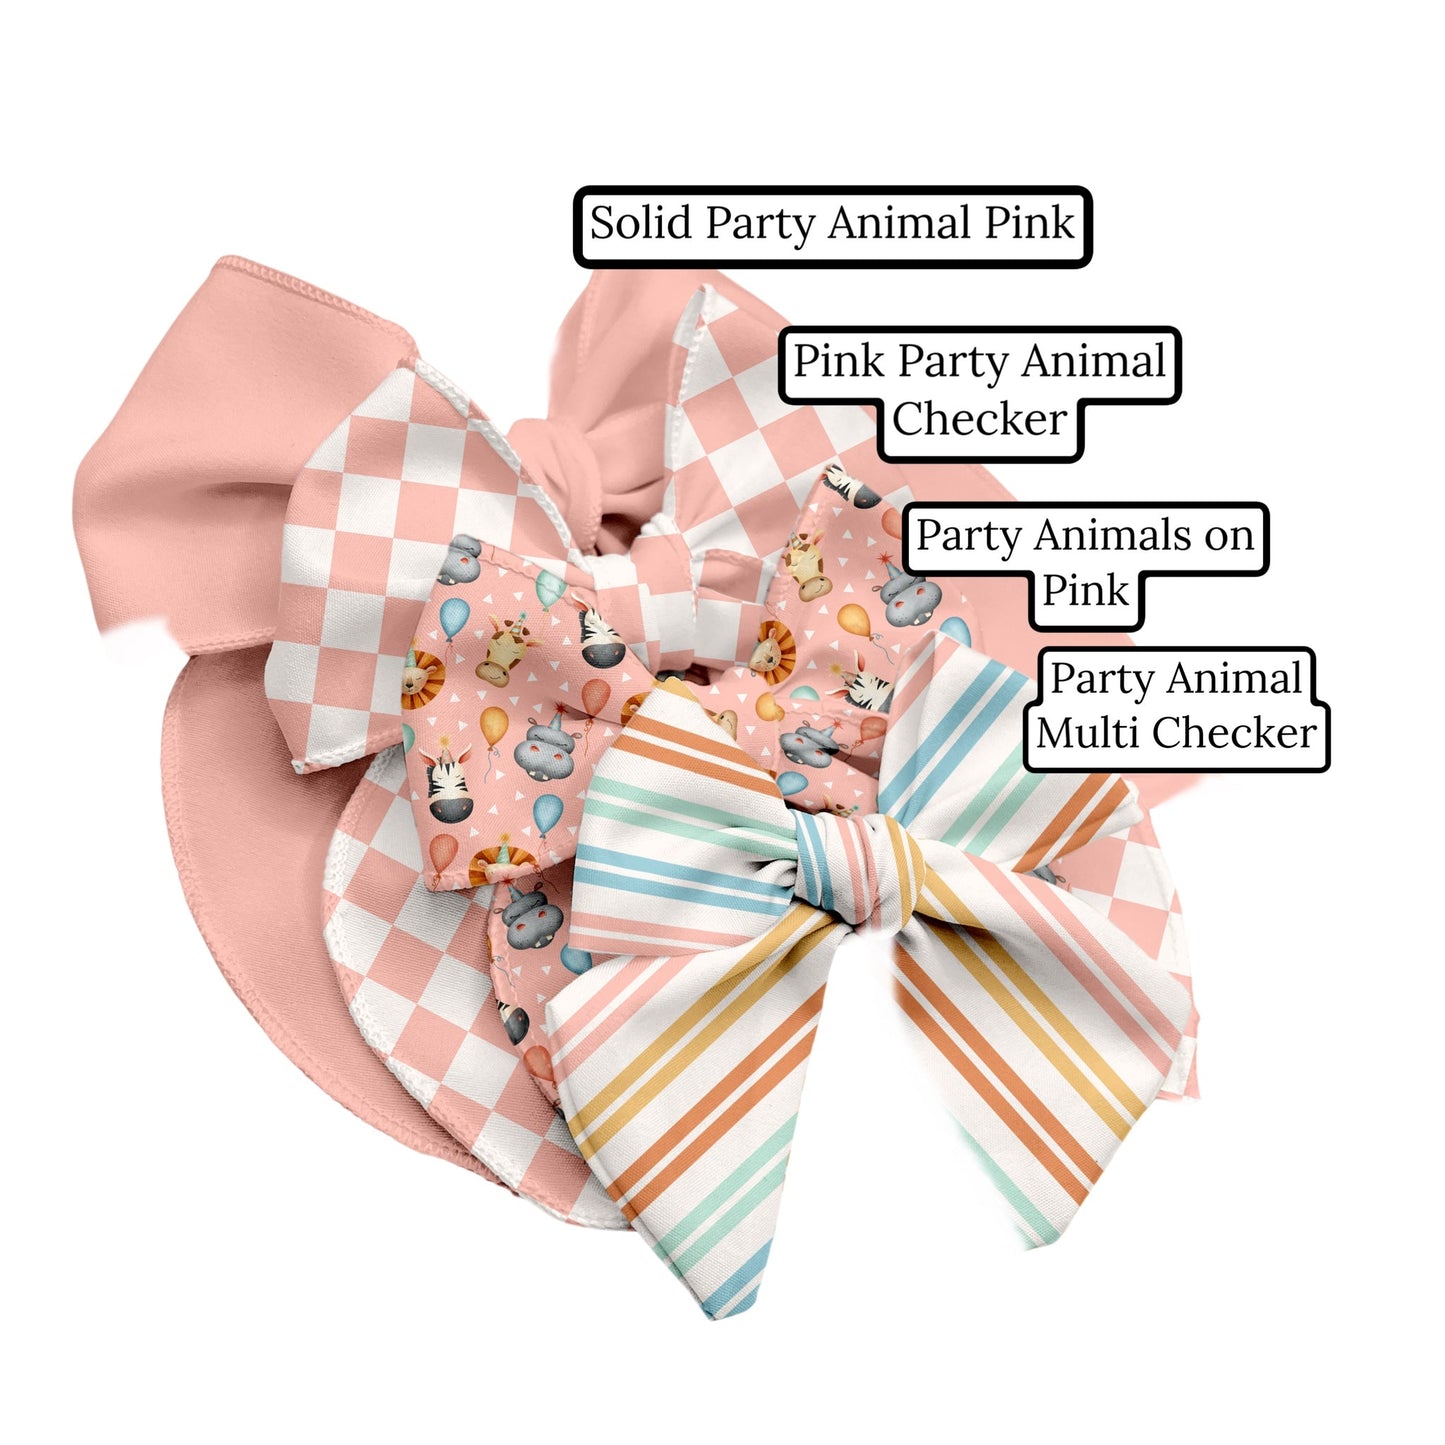 Mint Party Animal Checker Hair Bow Strips